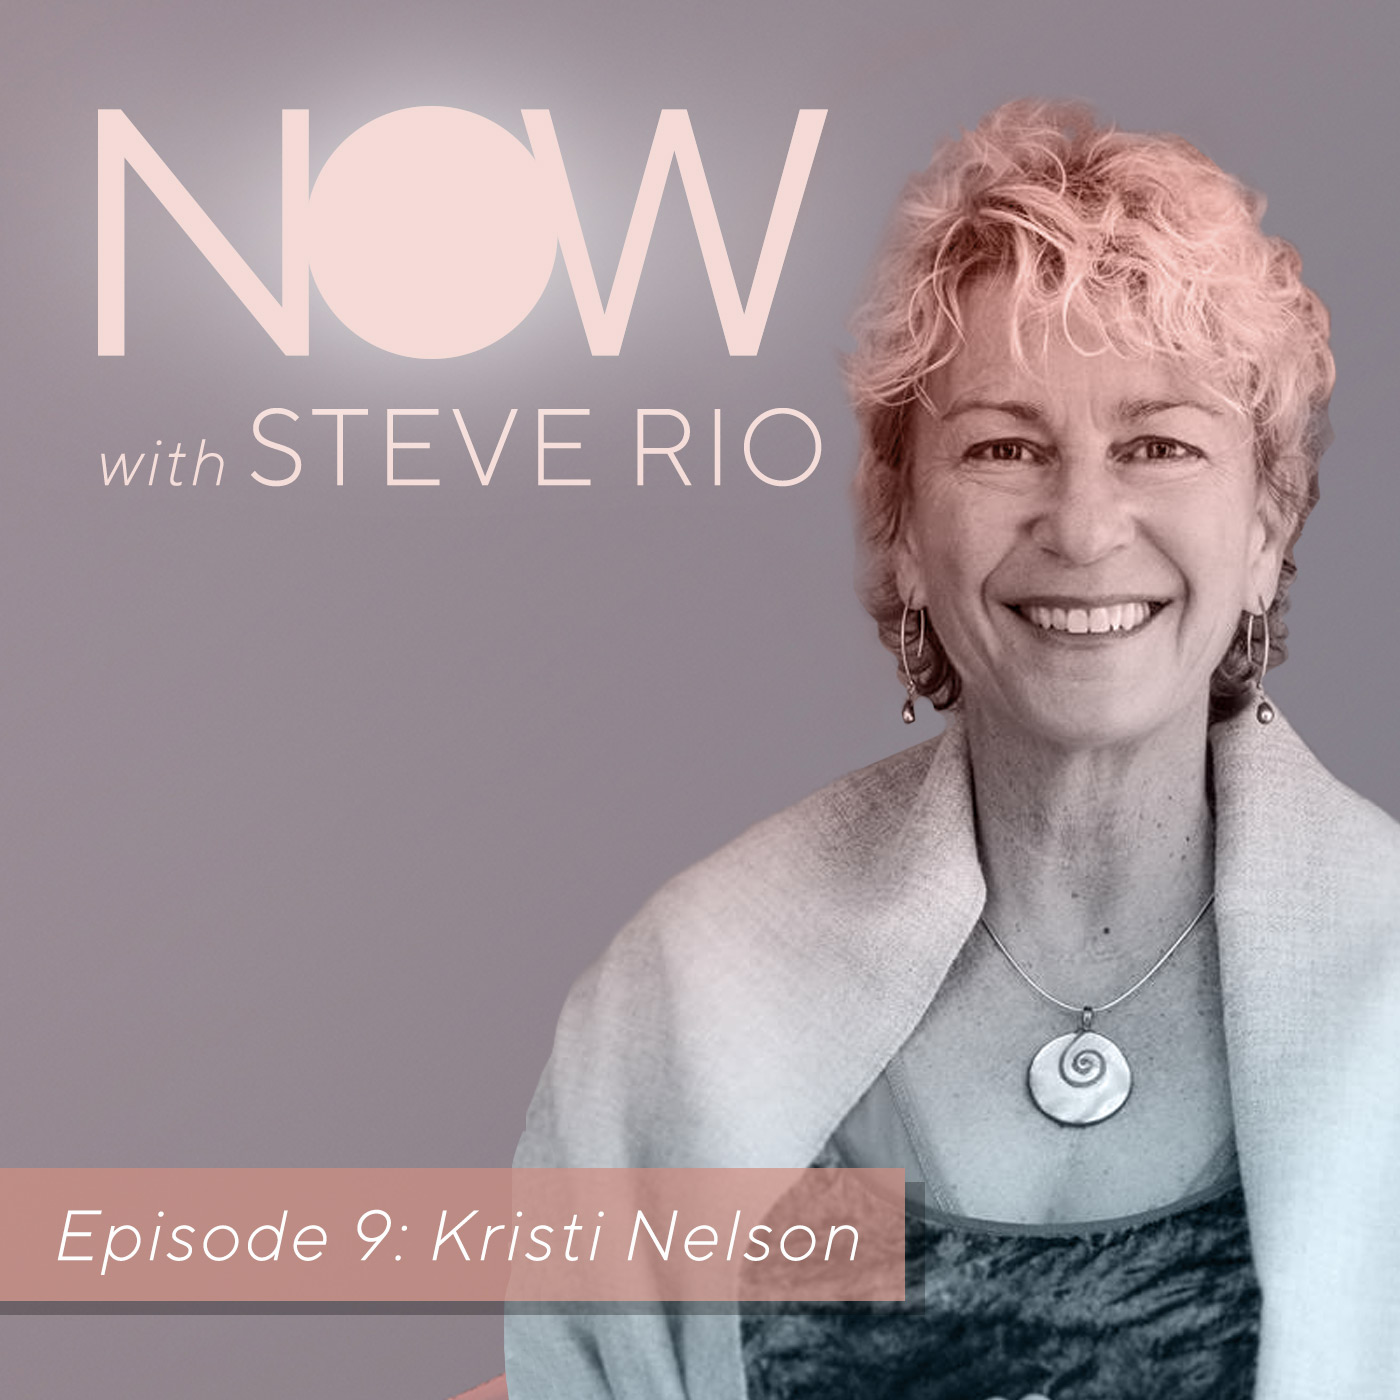 Kristi Nelson on NOW with Steve Rio